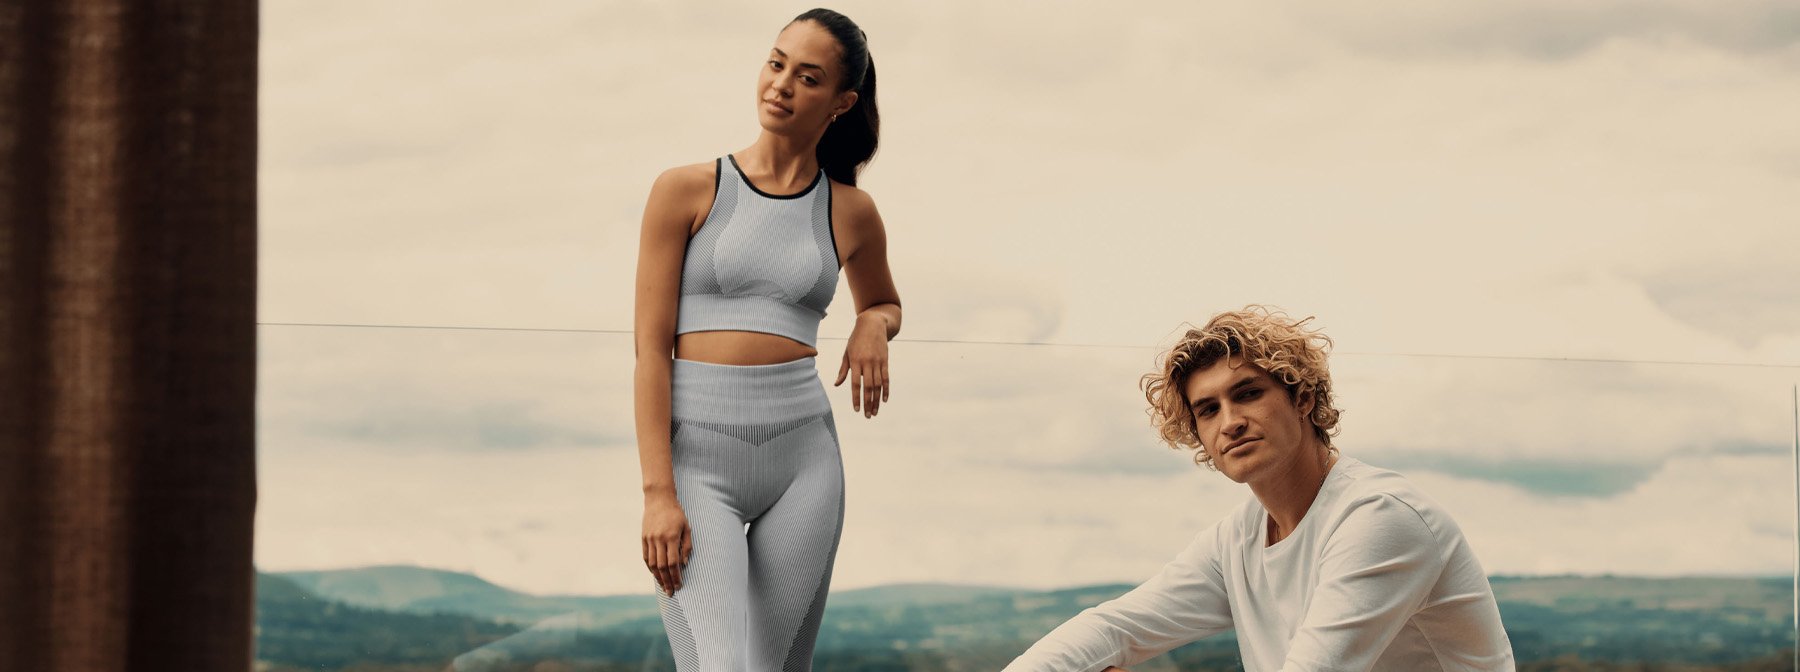 Just Dropped: New Activewear You Won’t Want To Miss This Impact Week